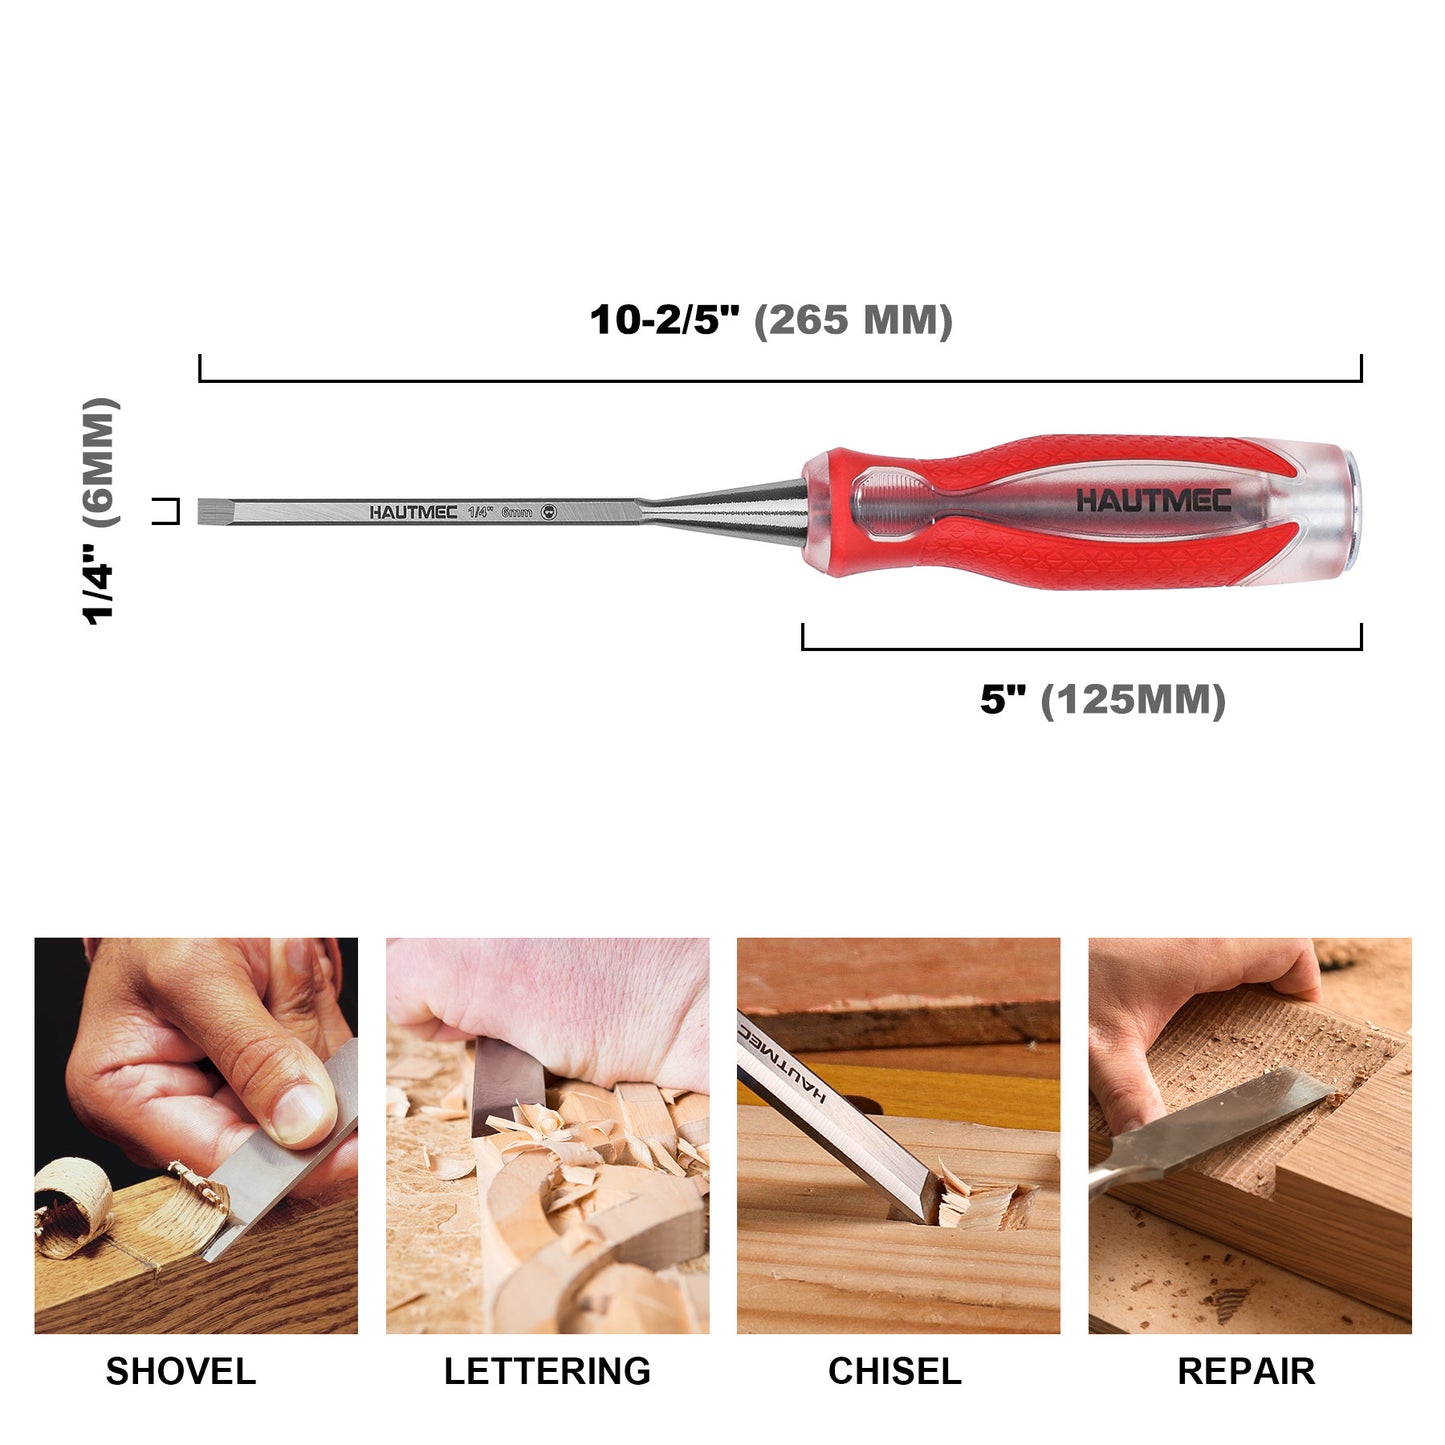 HAUTMEC 1/4" High Impact Wood Chisel for Woodworking, Drop-Forged CRV Steel, Beveled Edge Blade, Ergonomic Handle Wood Chisel for Carpentry,Wood Carvers, HT0359